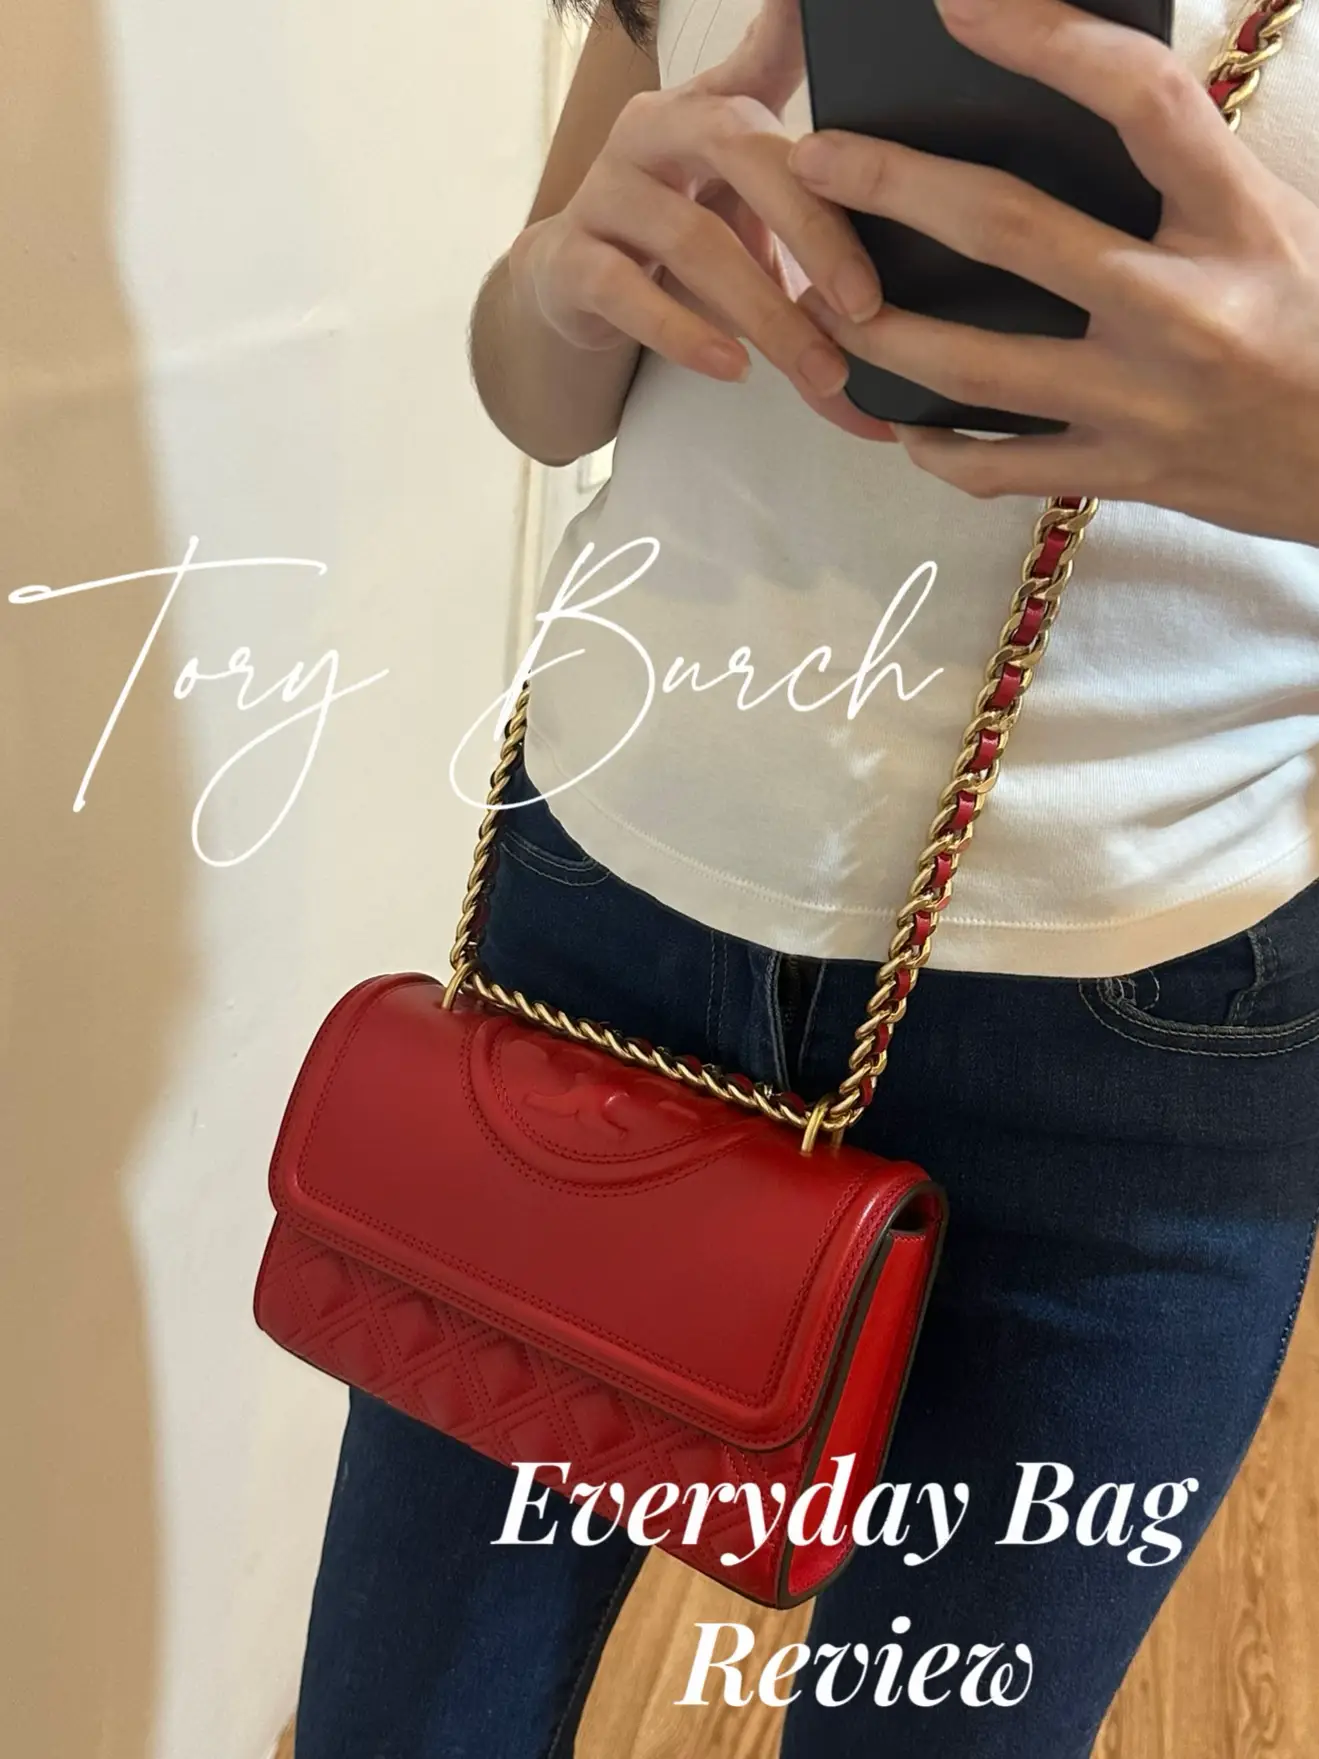 Tory Burch Sling Bag Review 💋❤️, Gallery posted by Nadia Annisa